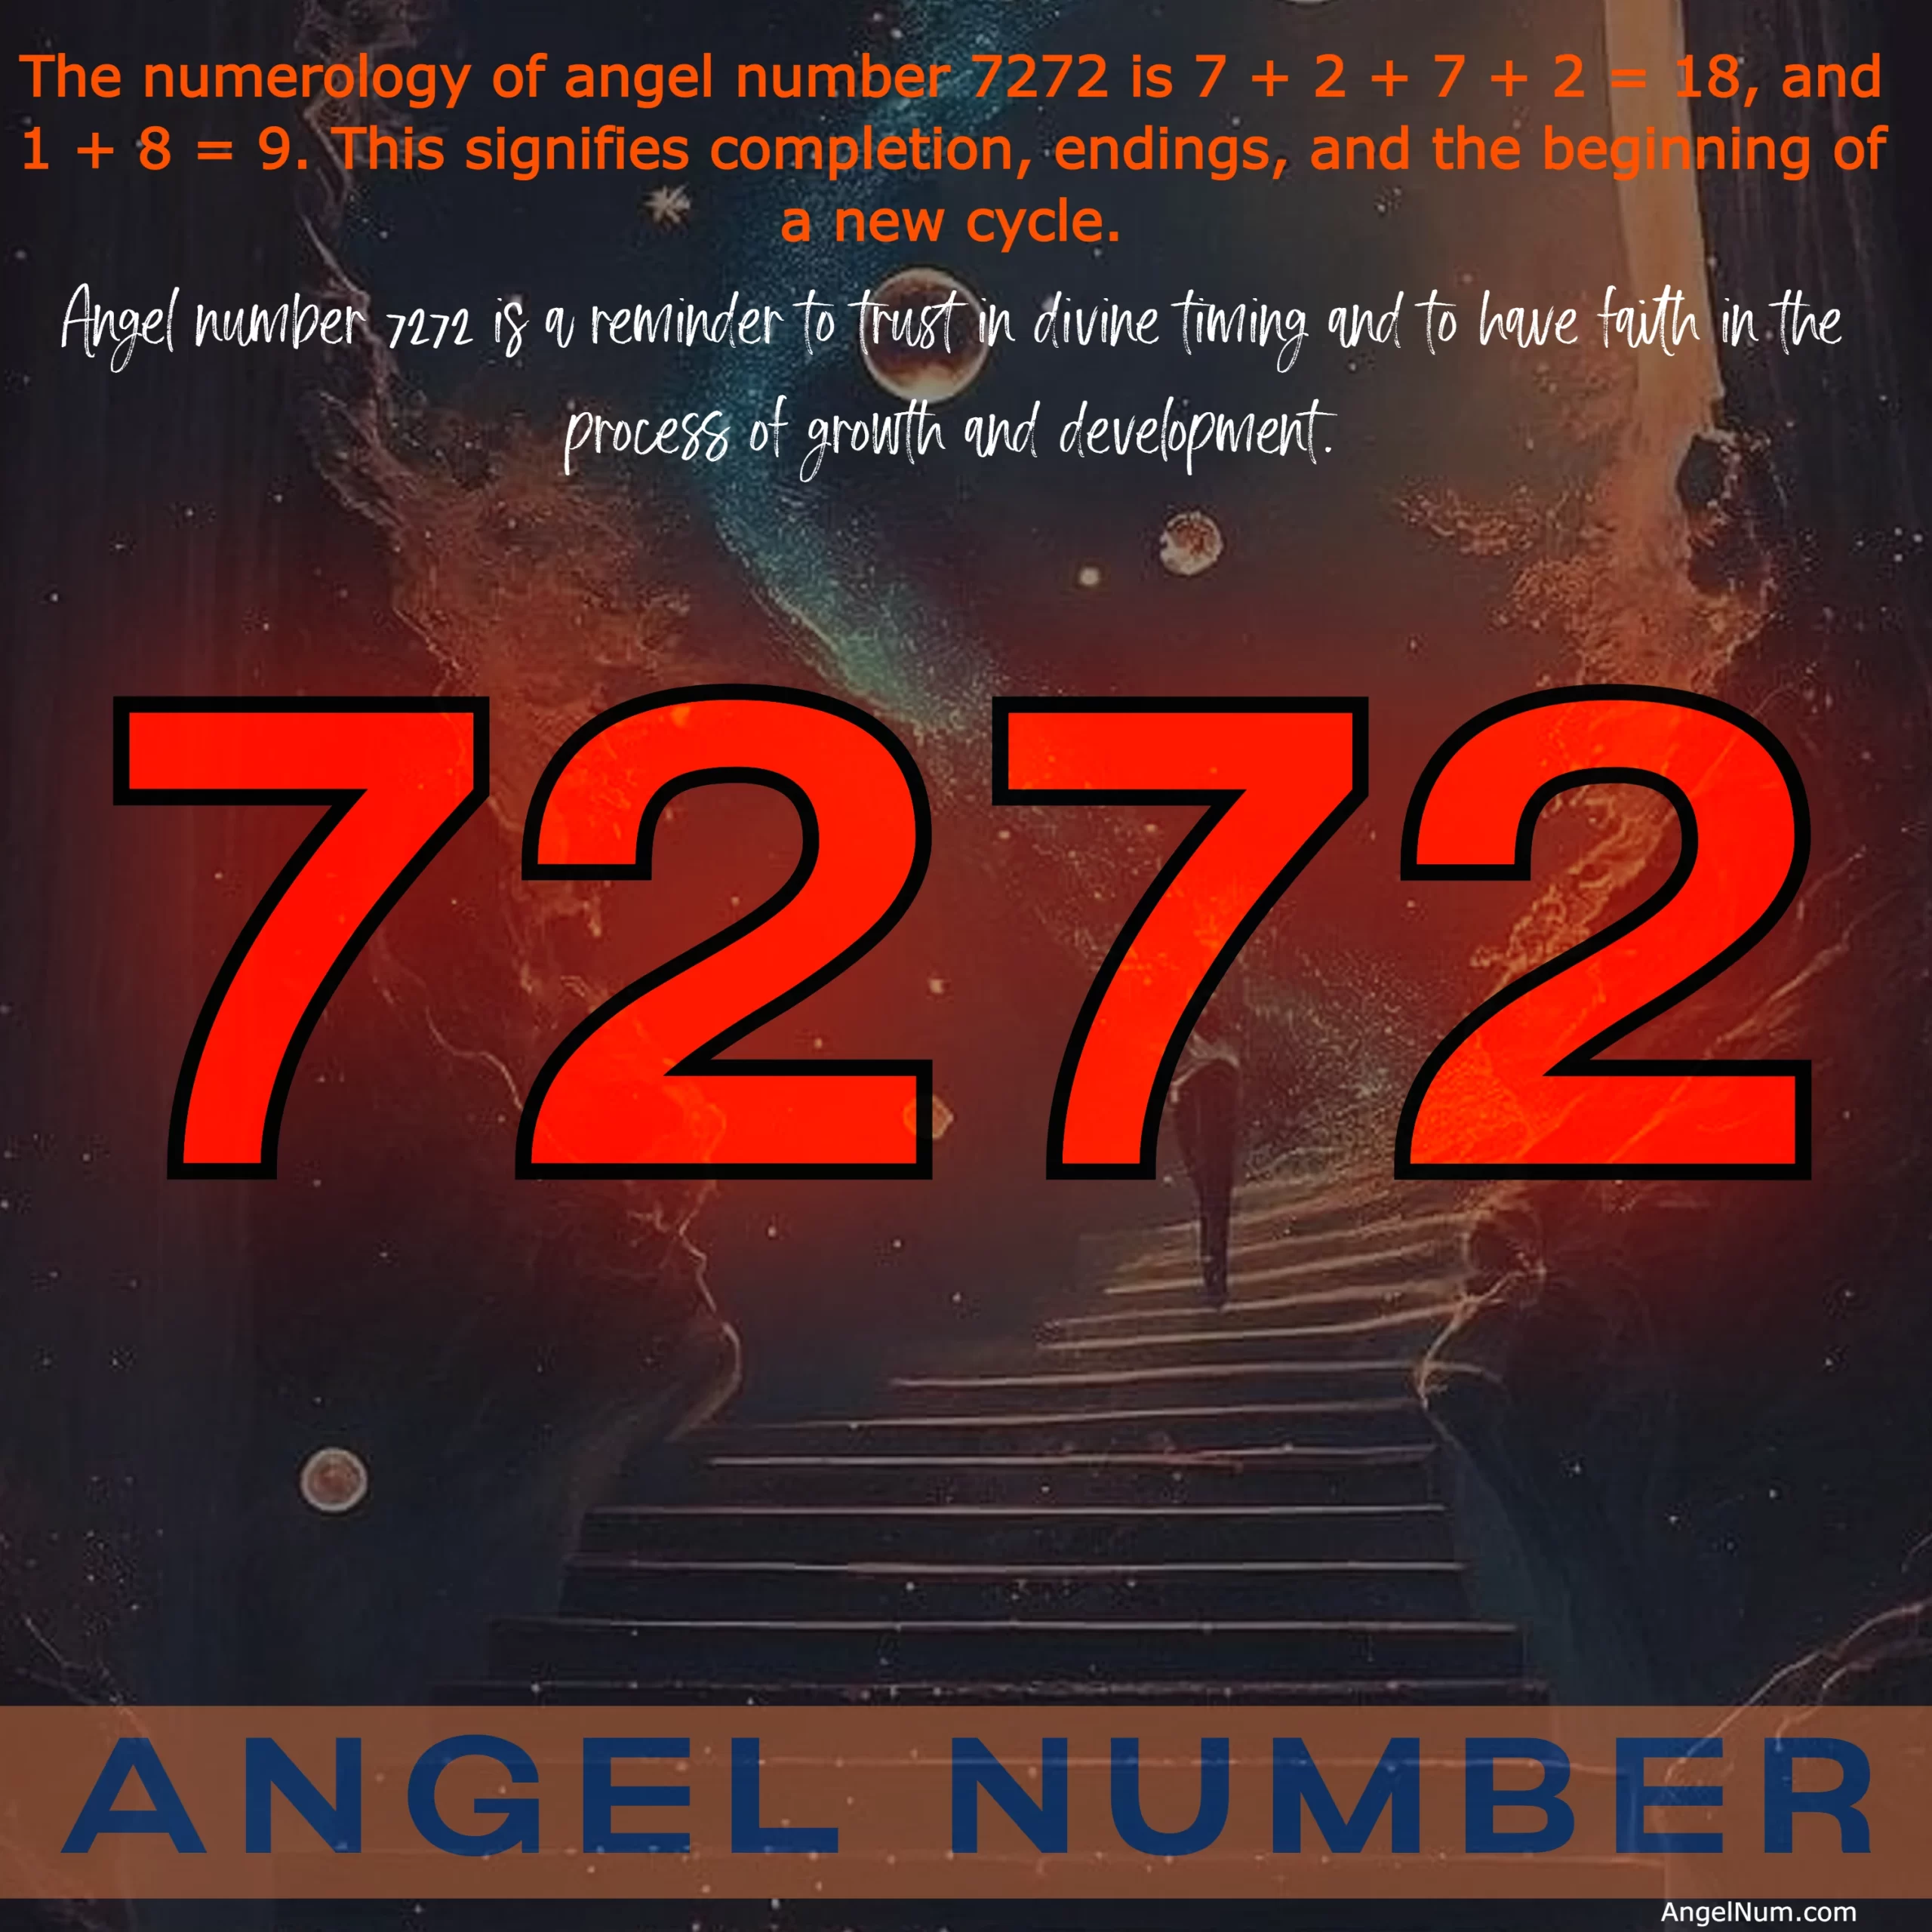 Angel Number 7272: Trust in Divine Timing and Inner Wisdom